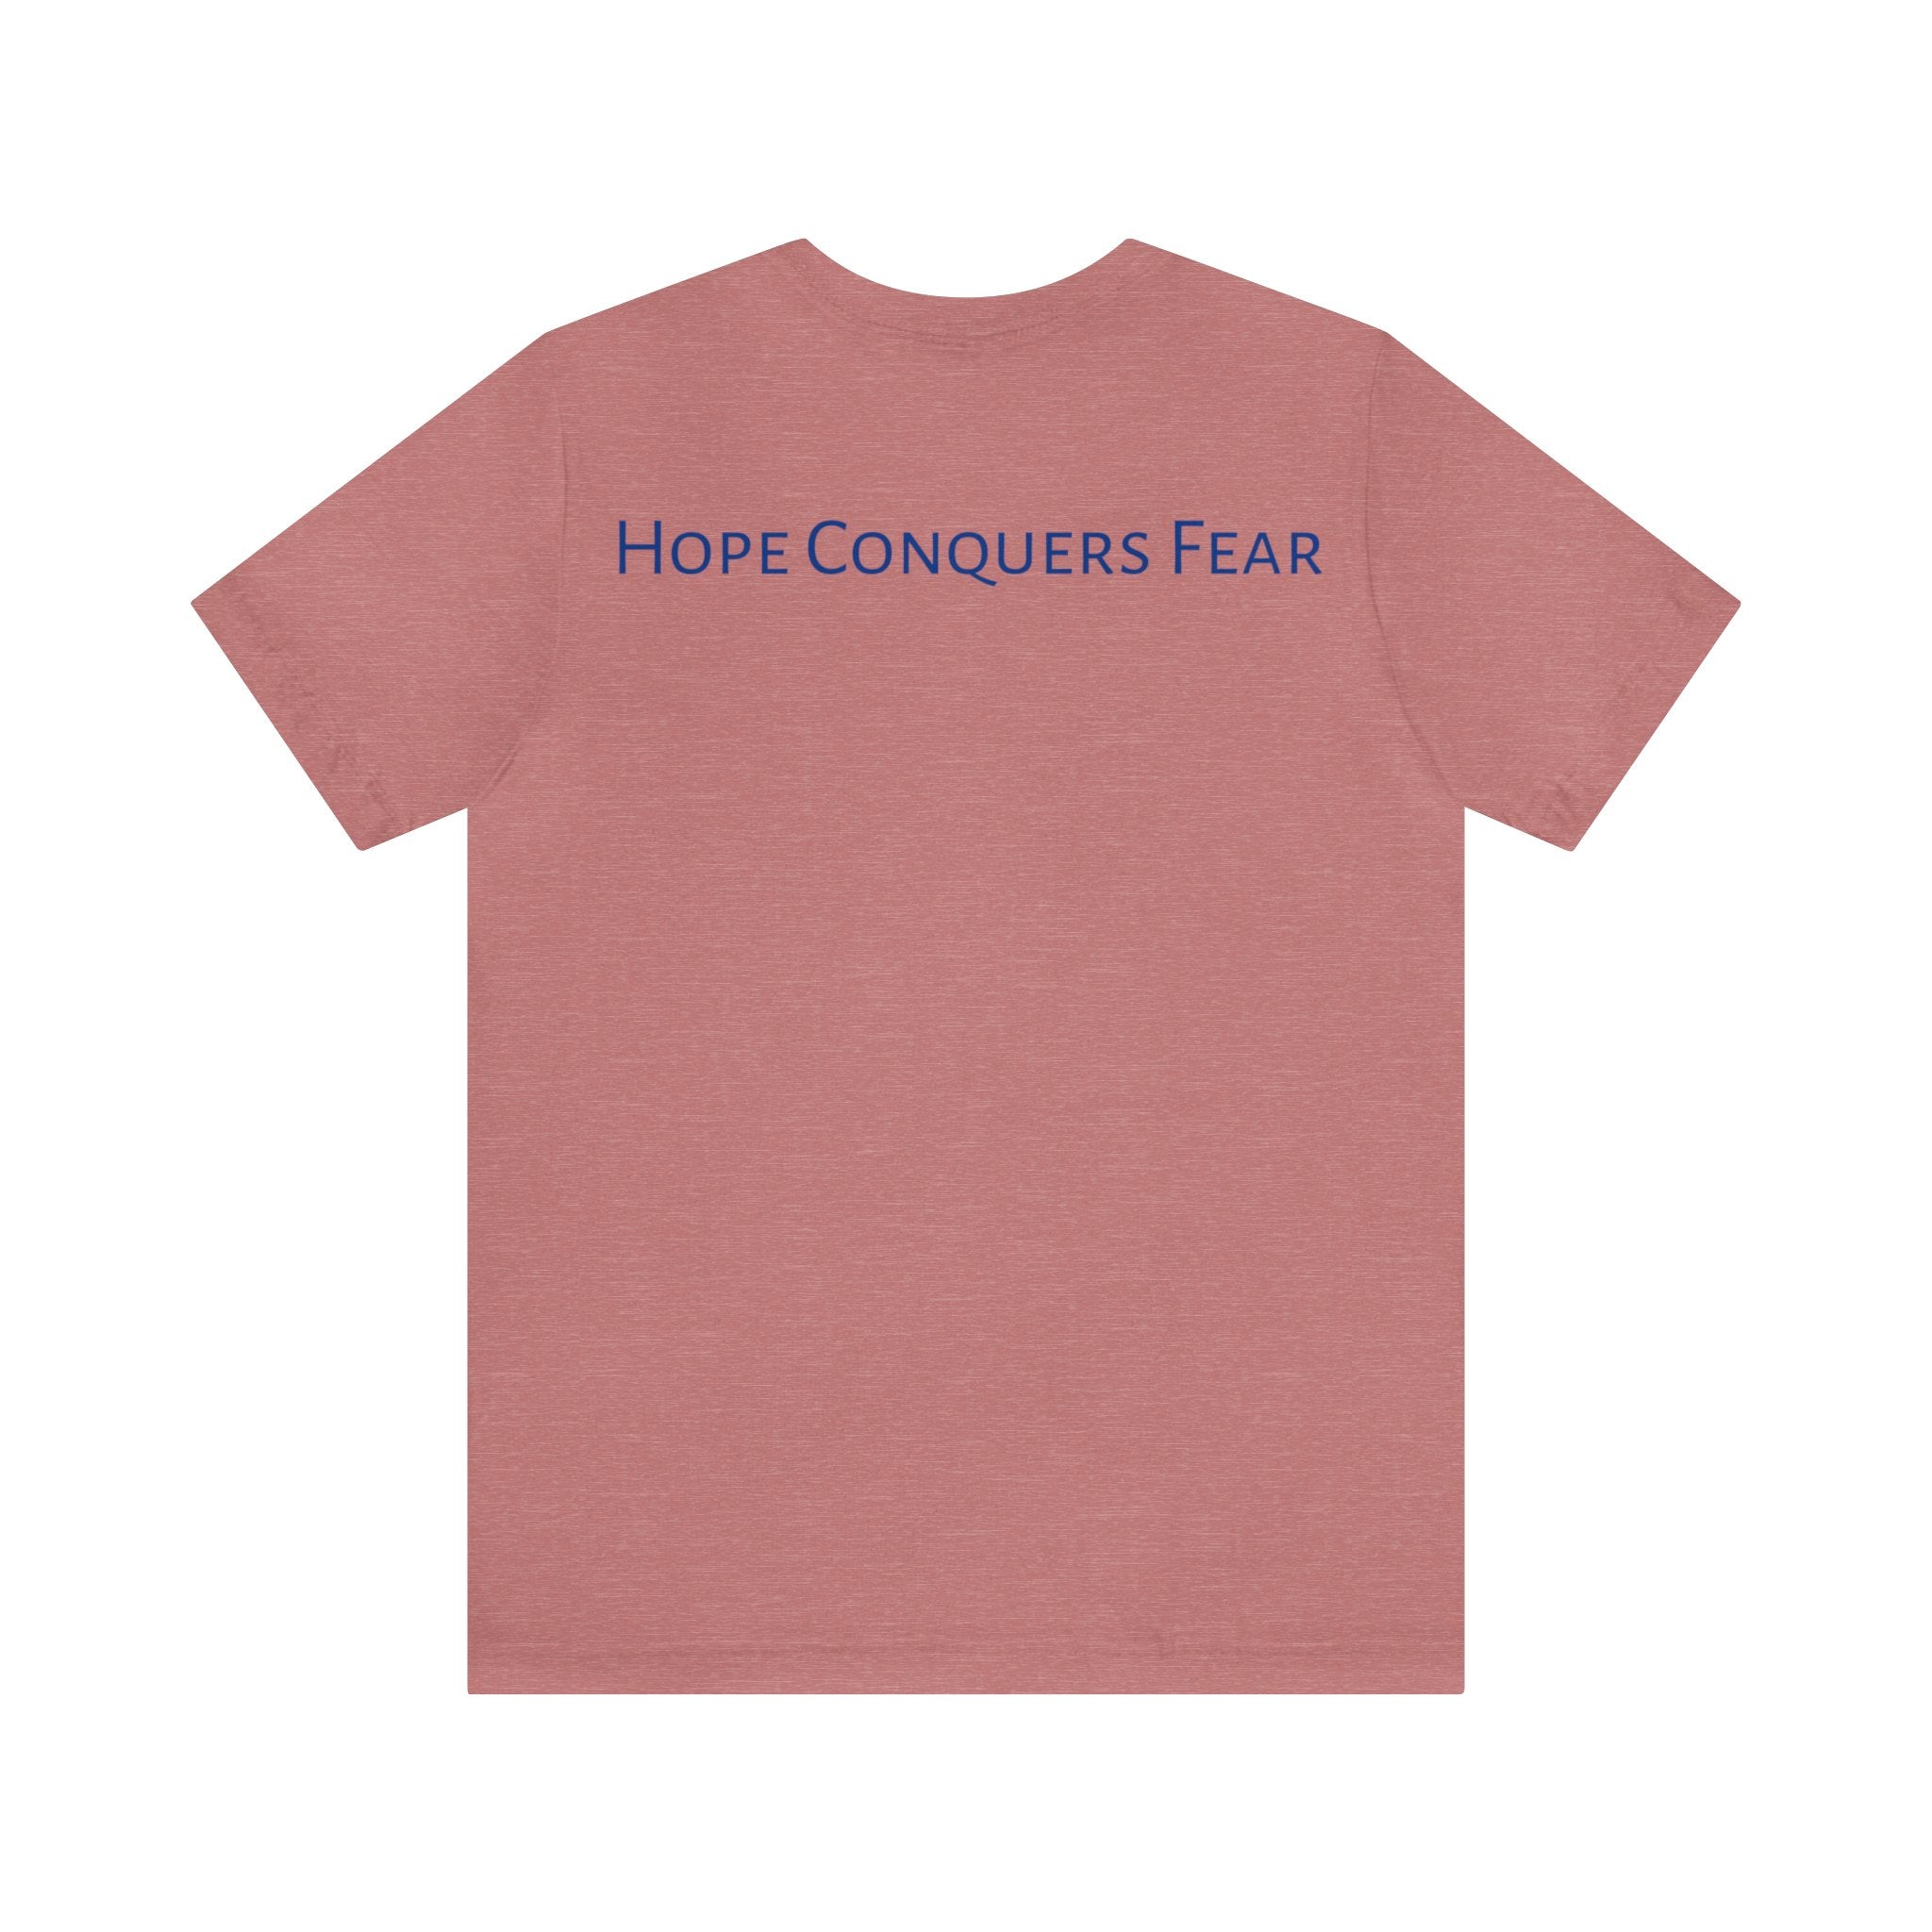 Hope Conquers Fear Jersey Tee - Bella+Canvas 3001 Heather Ice Blue Airlume Cotton Bella+Canvas 3001 Crew Neckline Jersey Short Sleeve Lightweight Fabric Mental Health Support Retail Fit Tear-away Label Tee Unisex Tee T-Shirt 10614607557042953444_2048 Printify